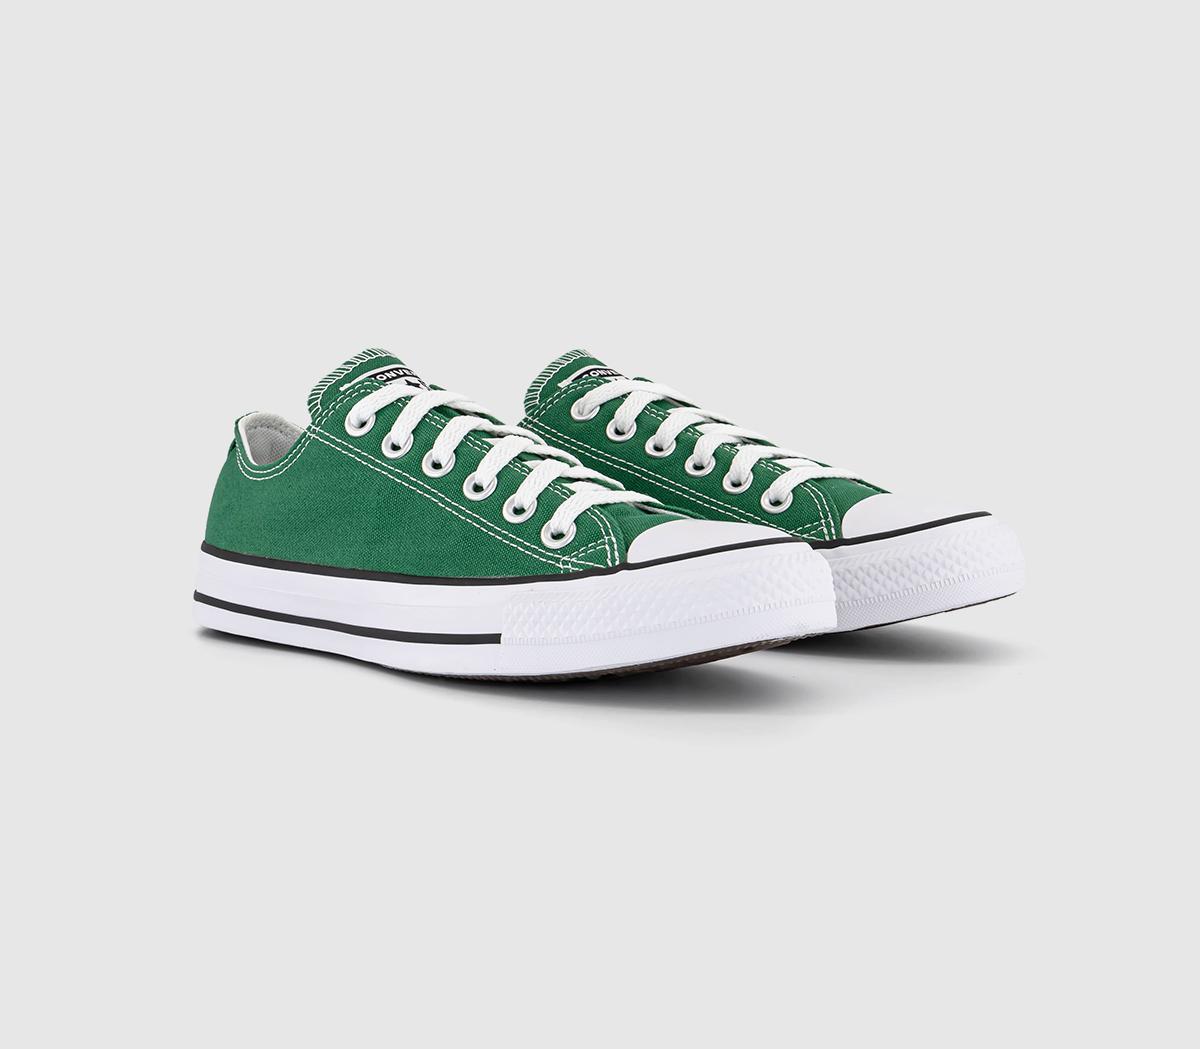 Converse All Star Low Trainers Amazon Green, 6.5